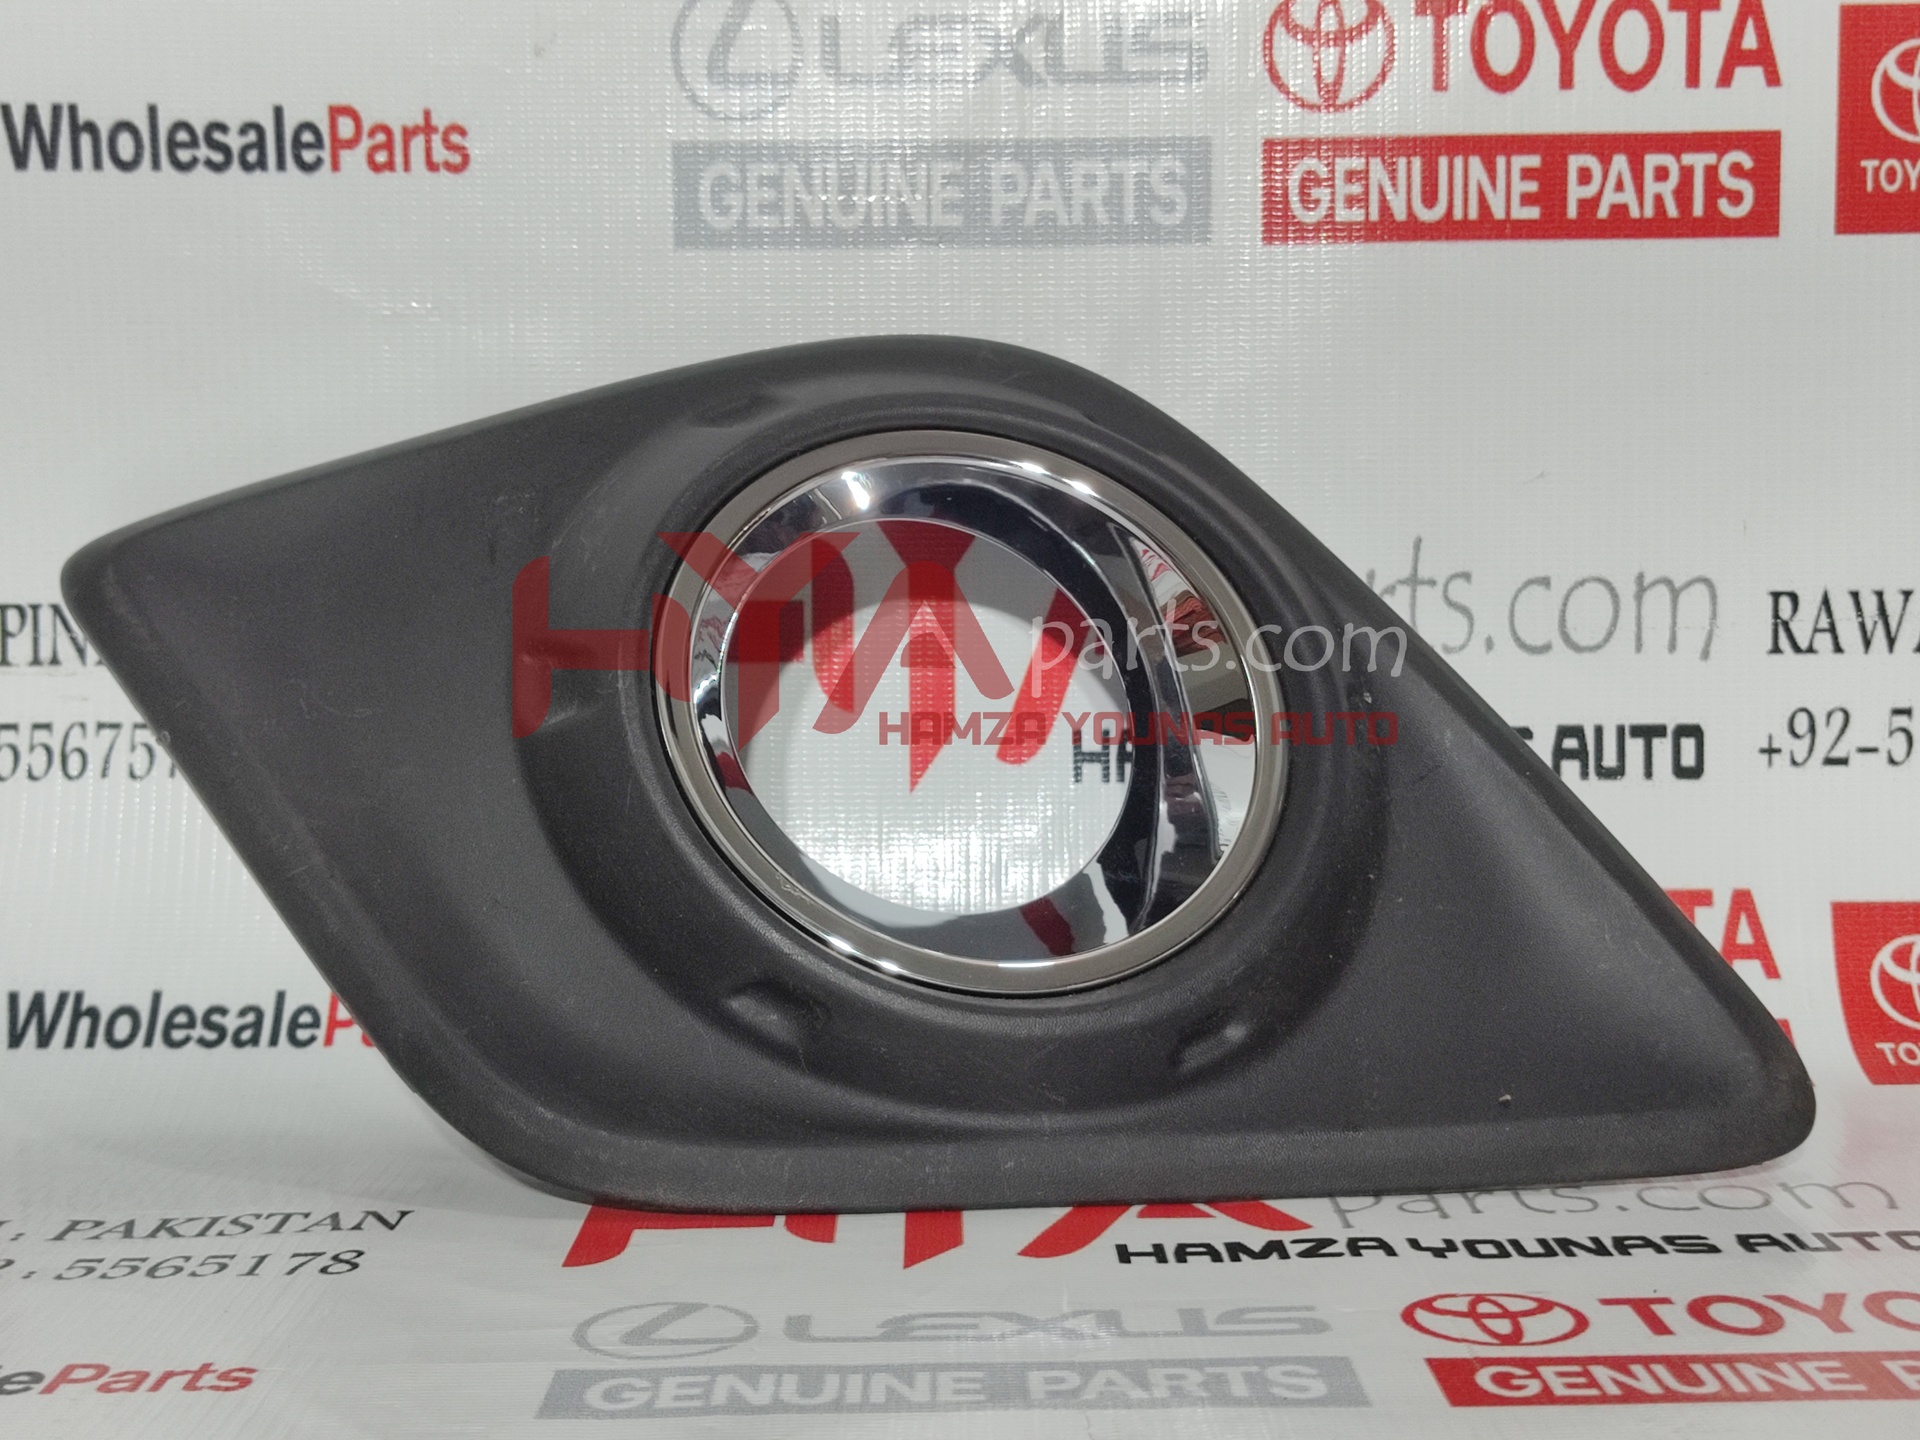 [52030-0k180-OPM] COVER ASSY, FRONT BUMPER HOLE, RH